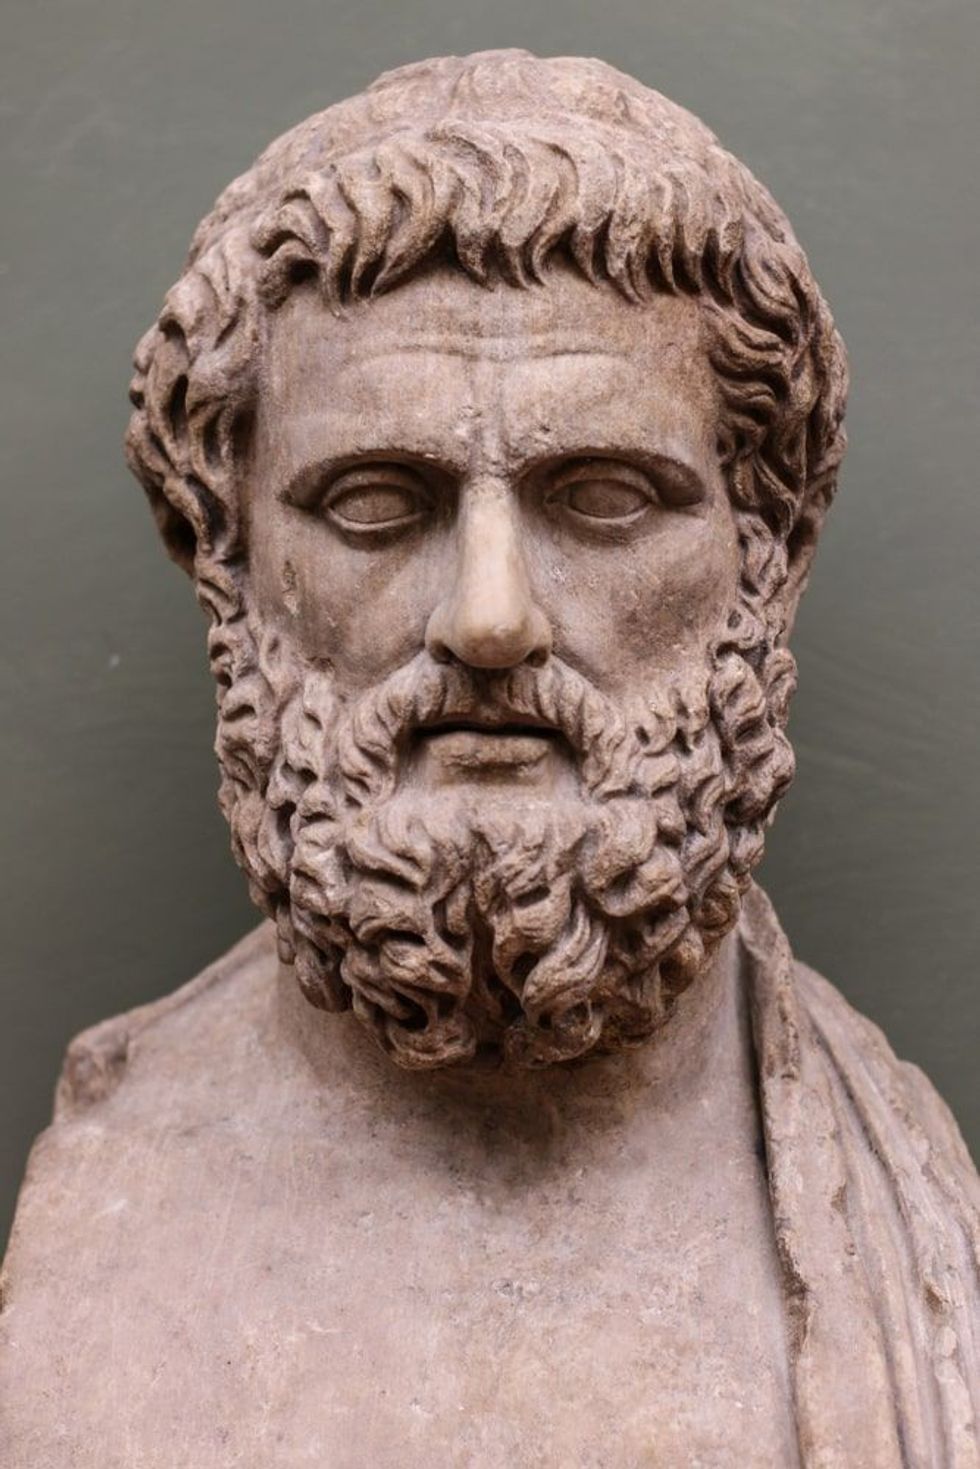 Sophocles is one of three ancient Greek tragedians or play writers